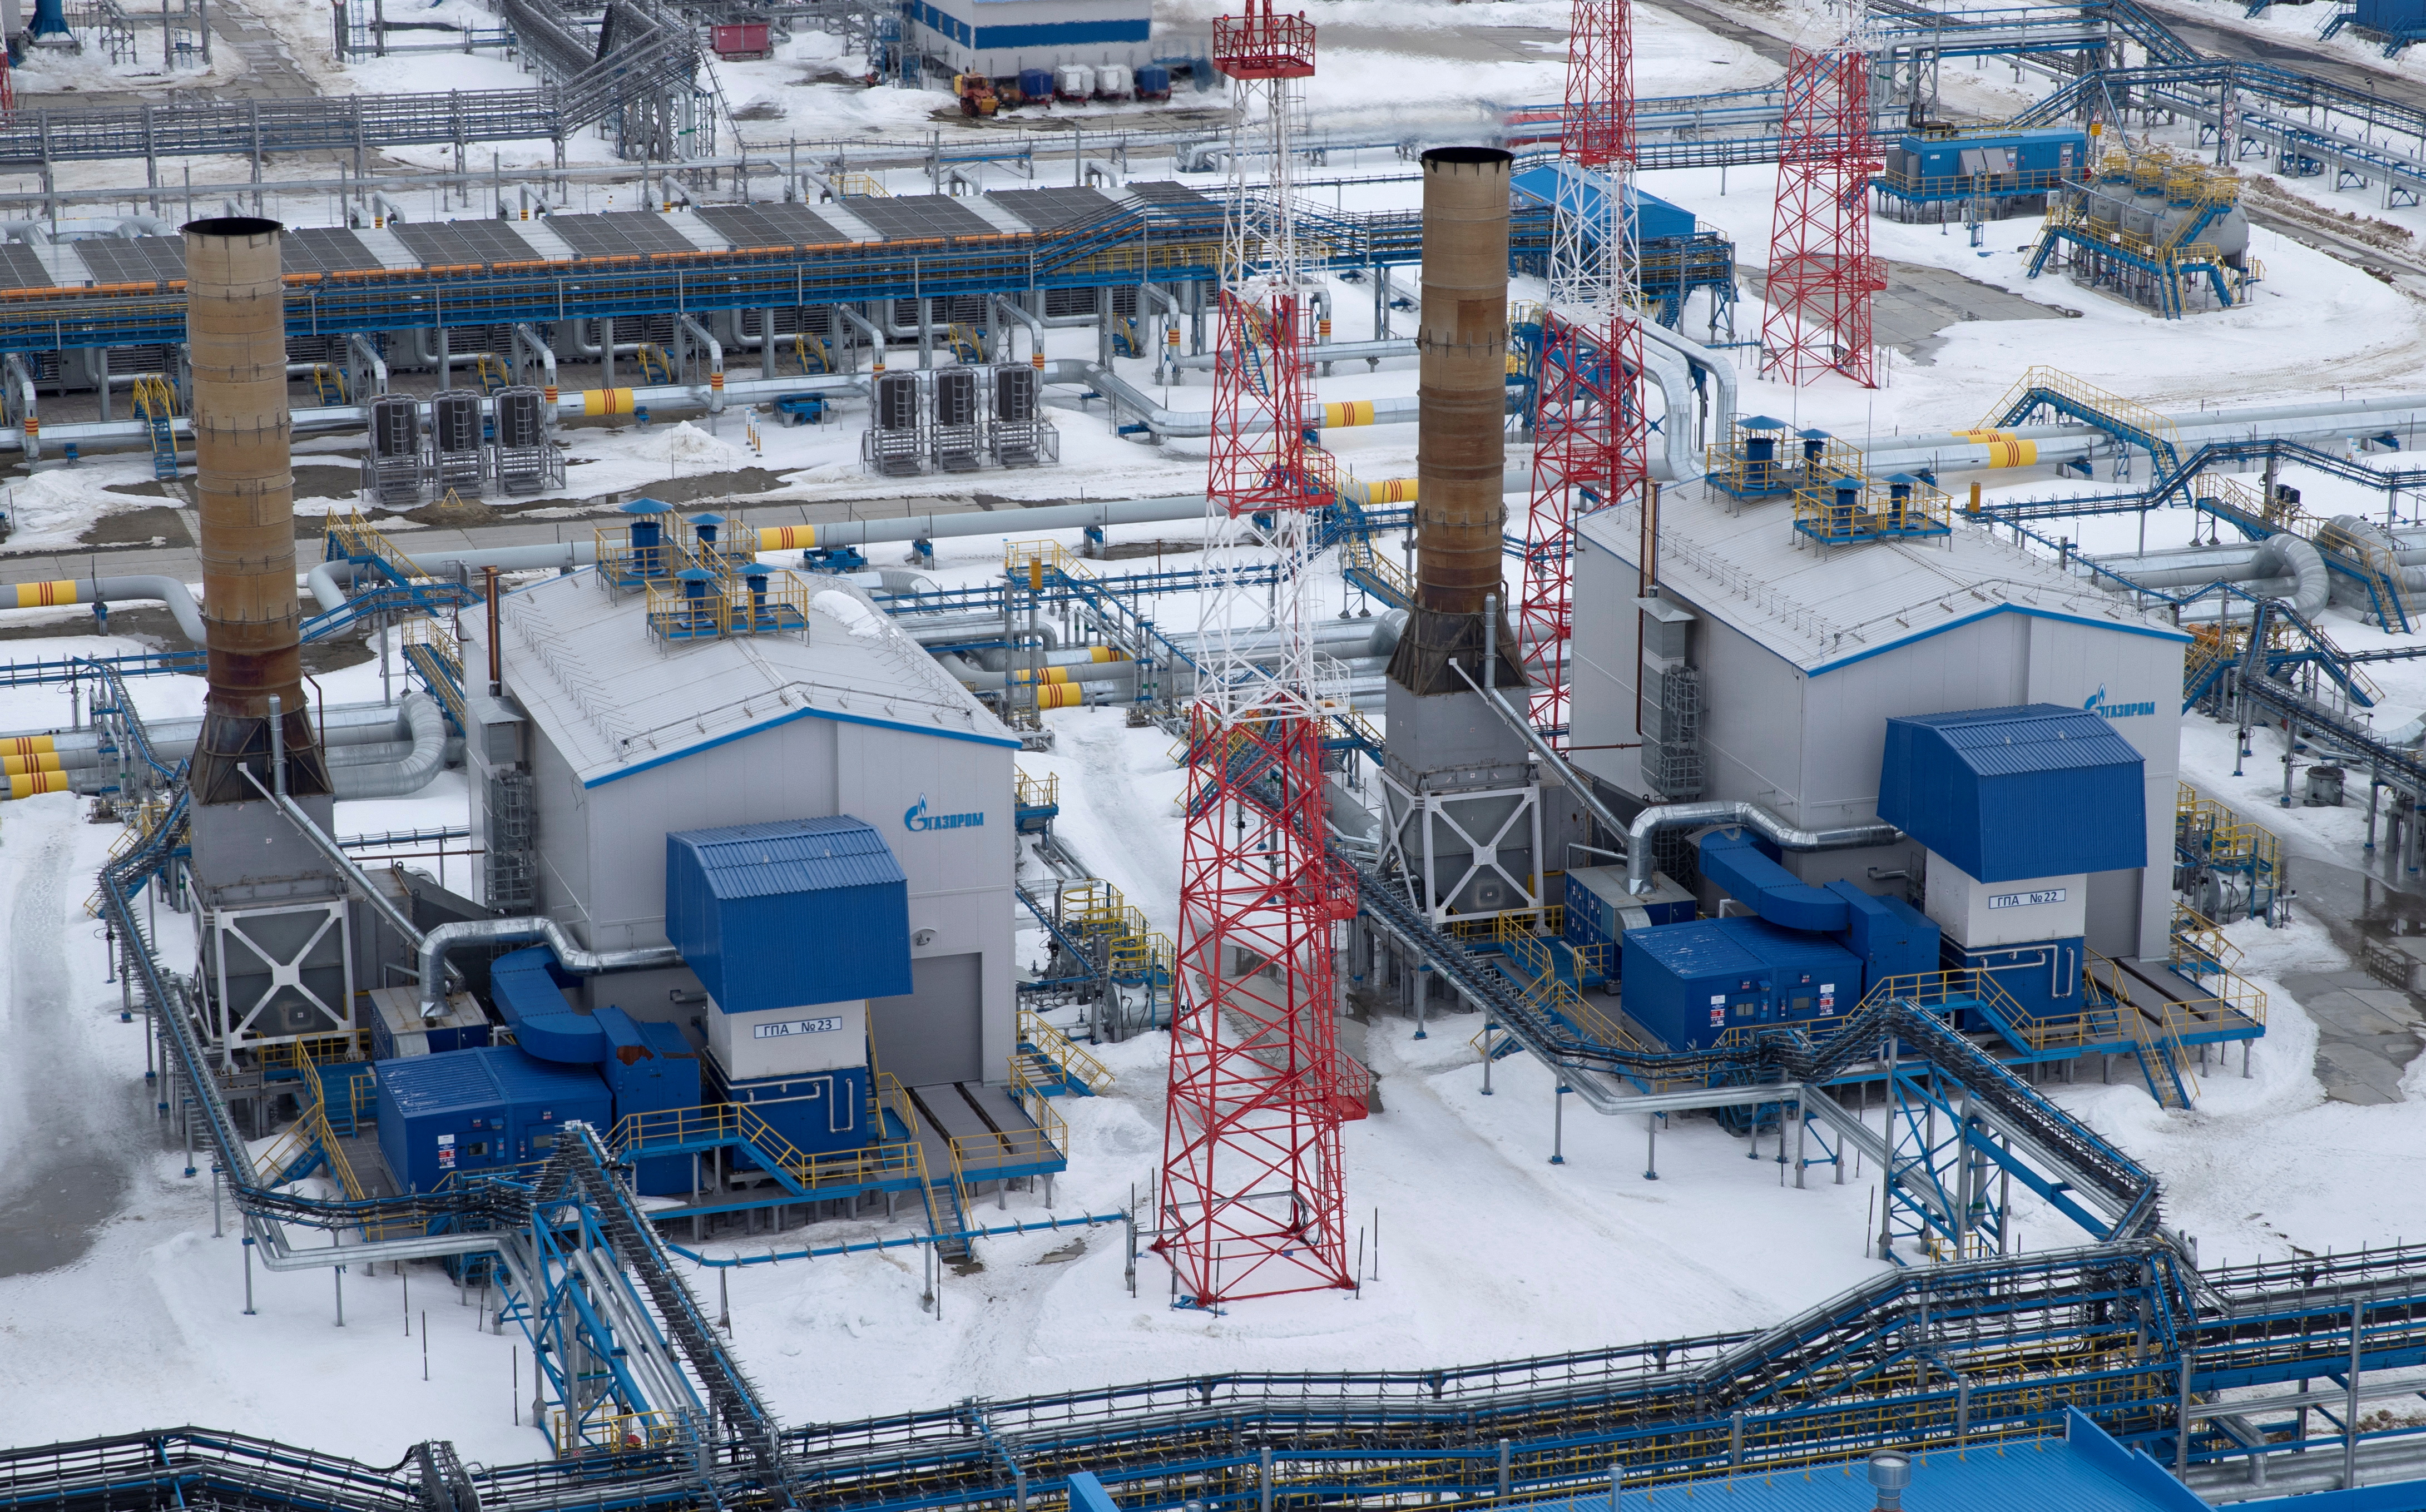 A view shows Gazprom's gas processing facility at Bovanenkovo gas field